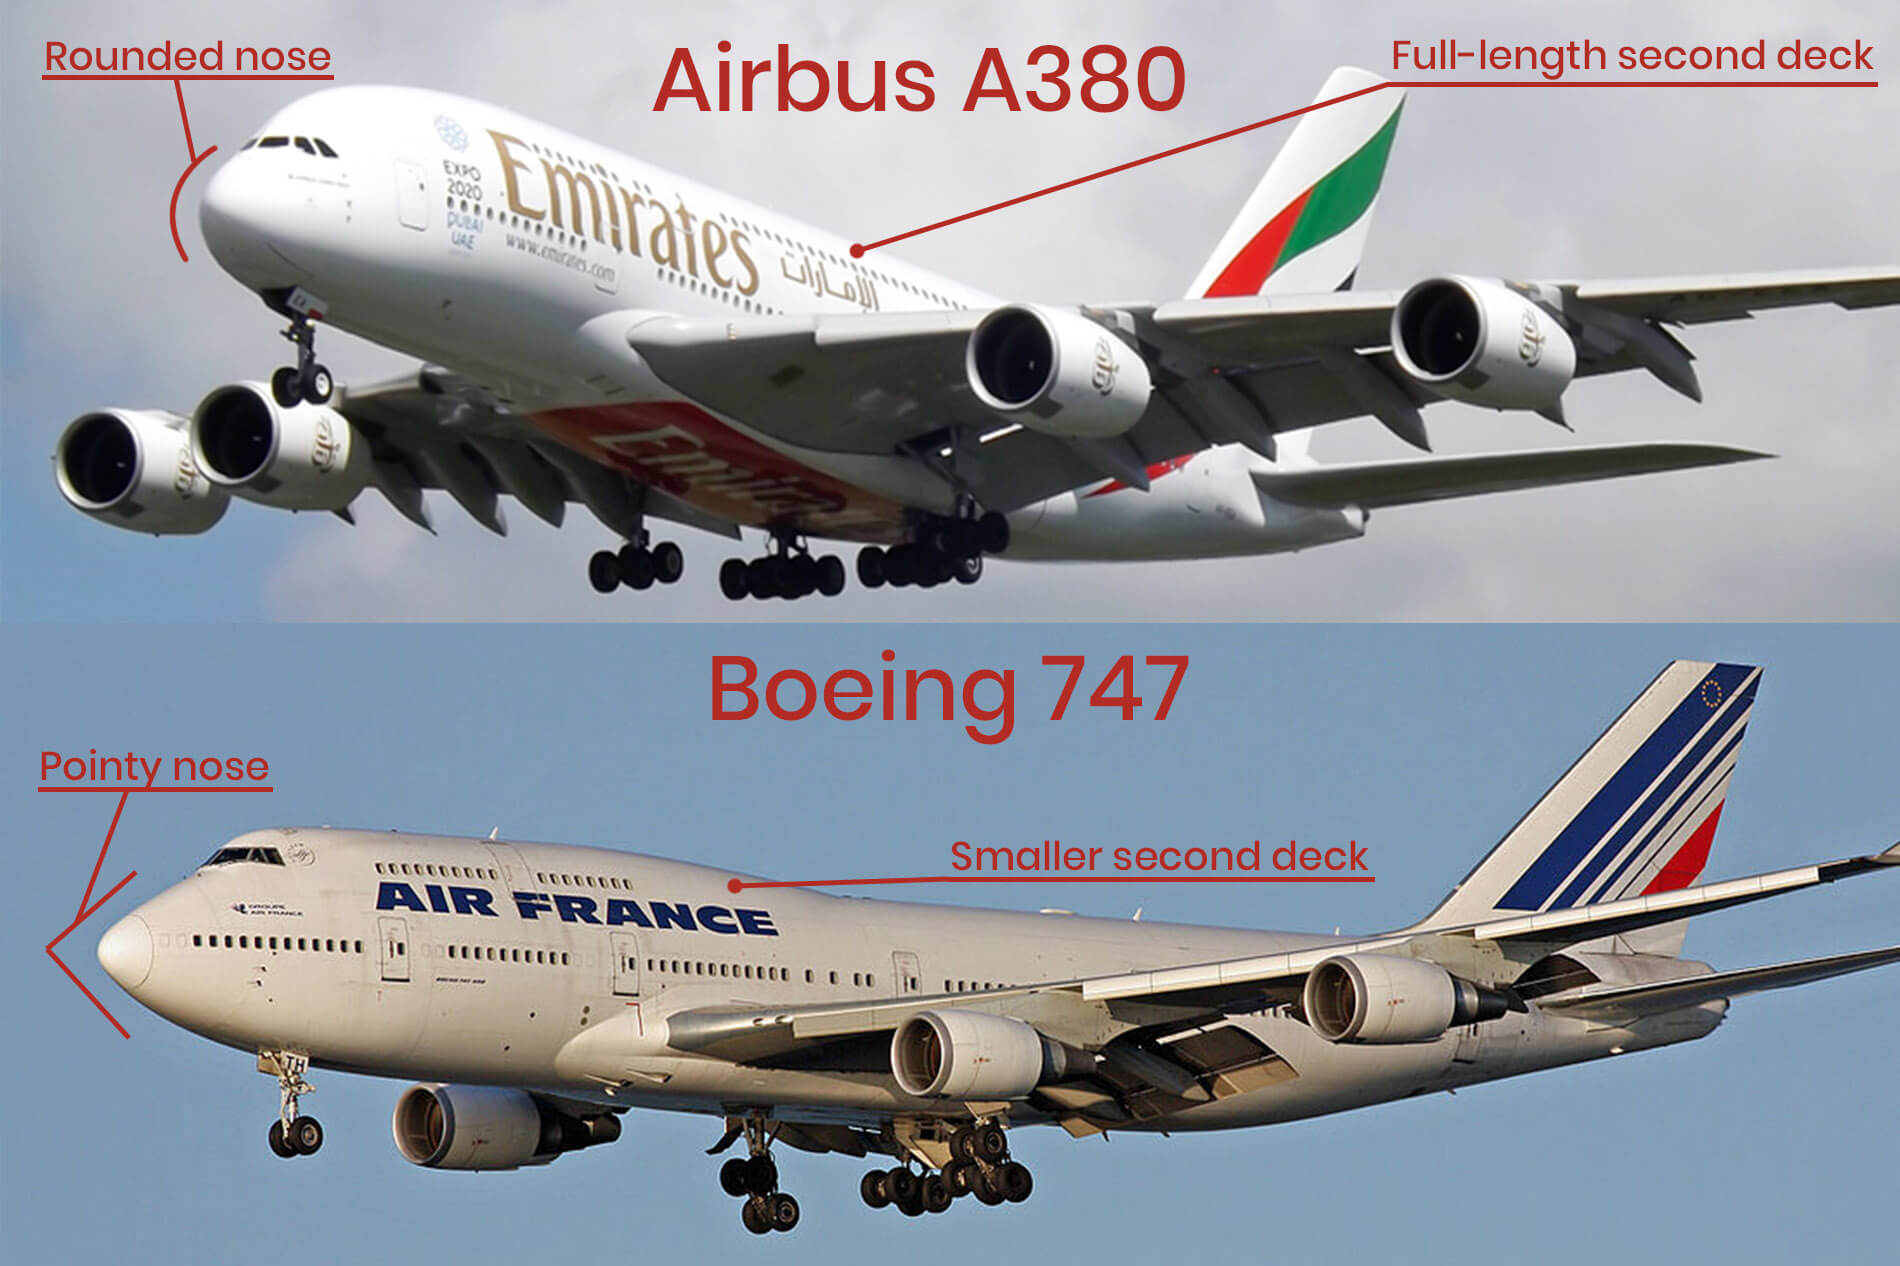 Airbus A380 Boeing 747 spotting guide